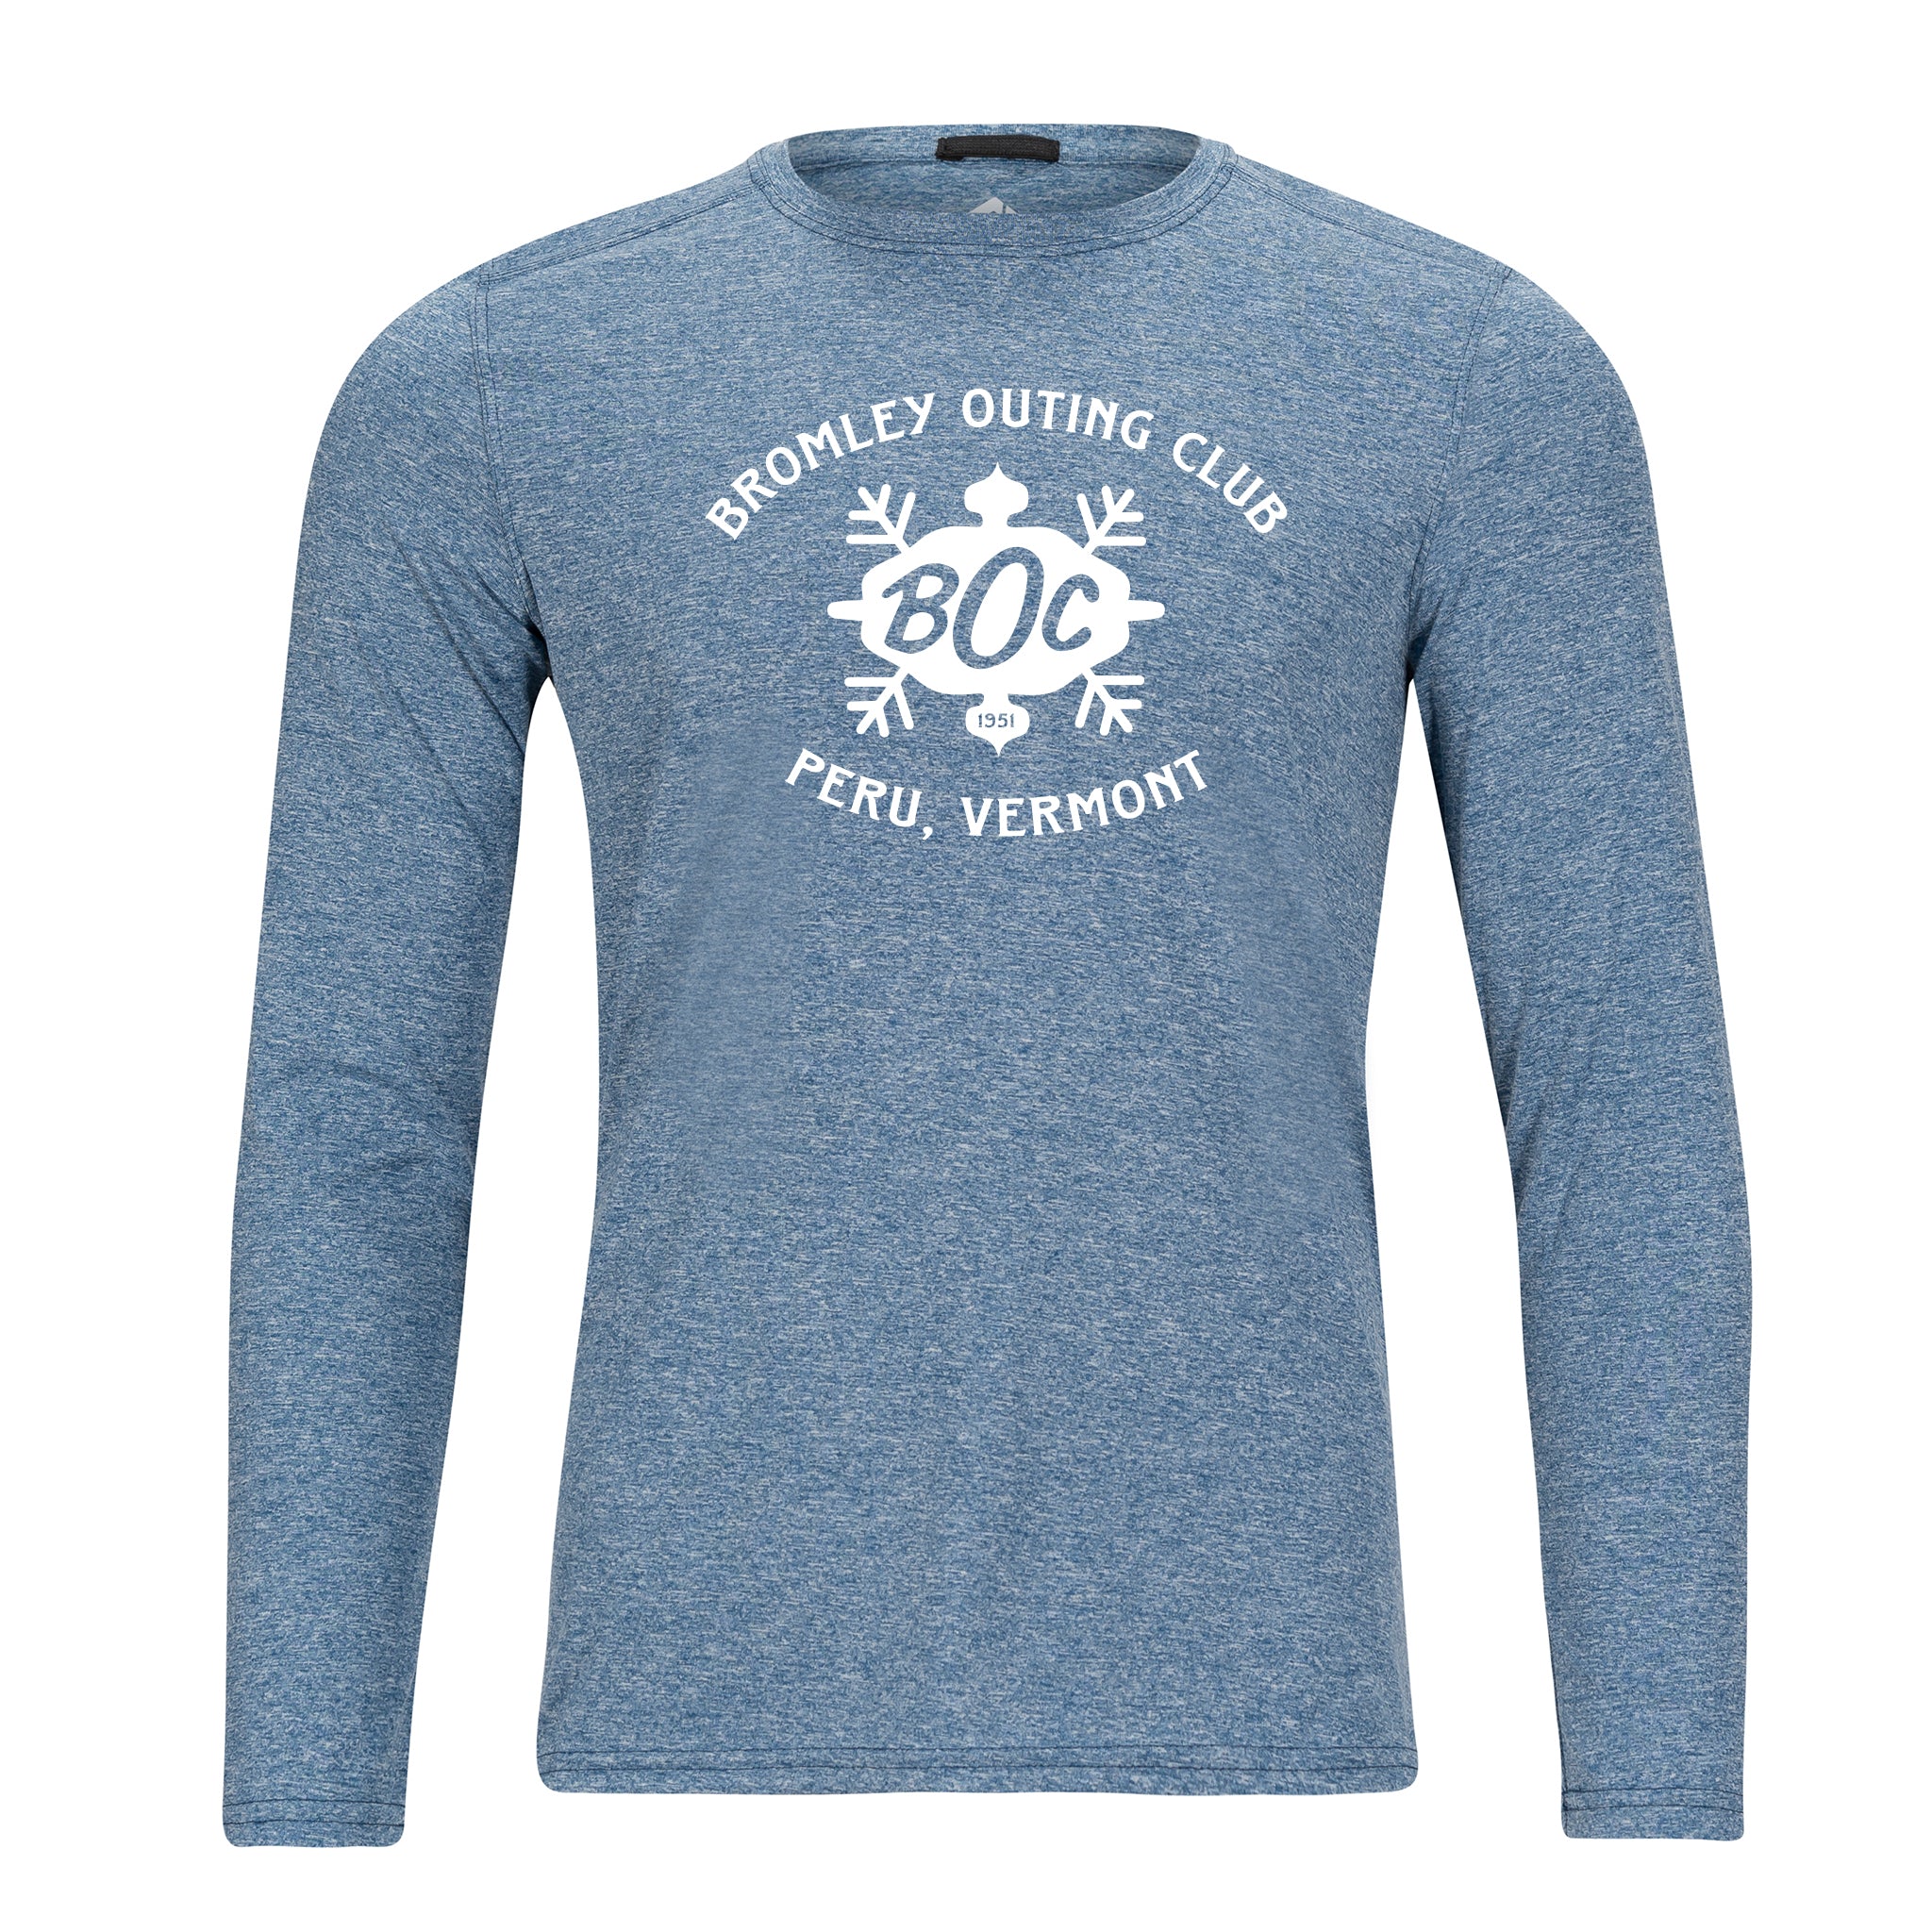 Men's Deluge Long Sleeve - Bromley Outing Club